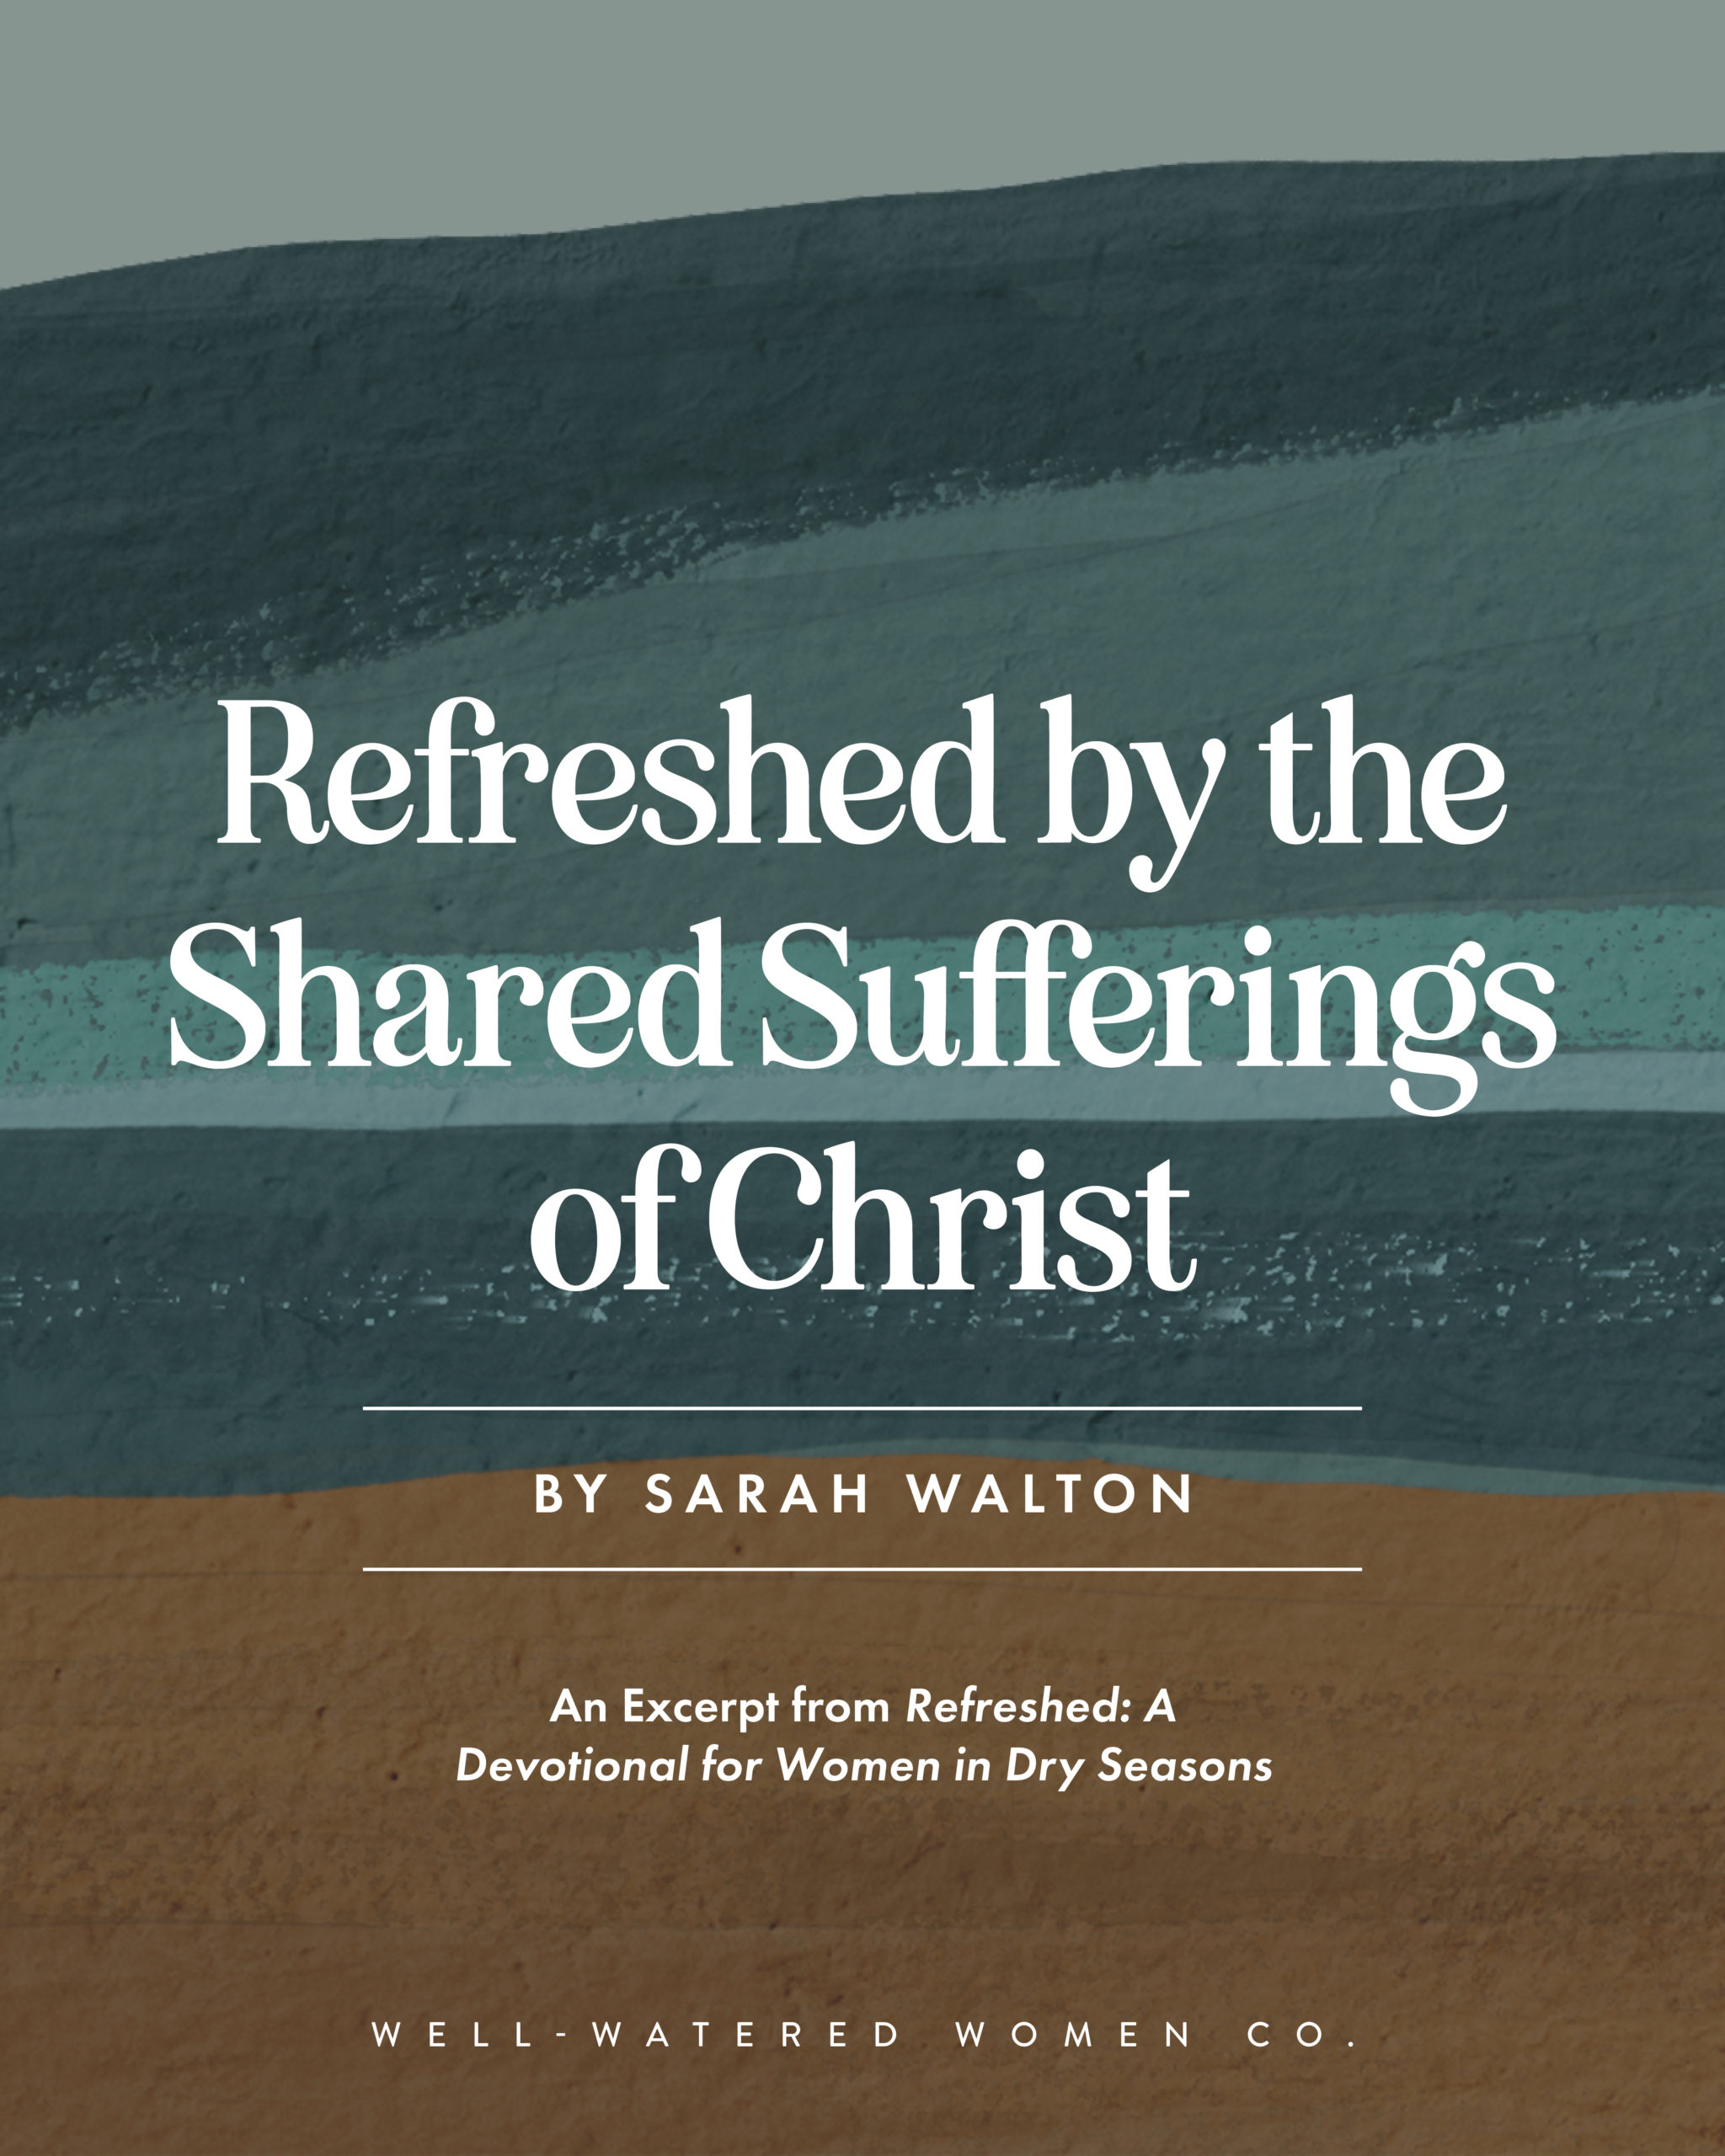 Refreshed by the Shared Sufferings of Christ - an article by Well-Watered Women